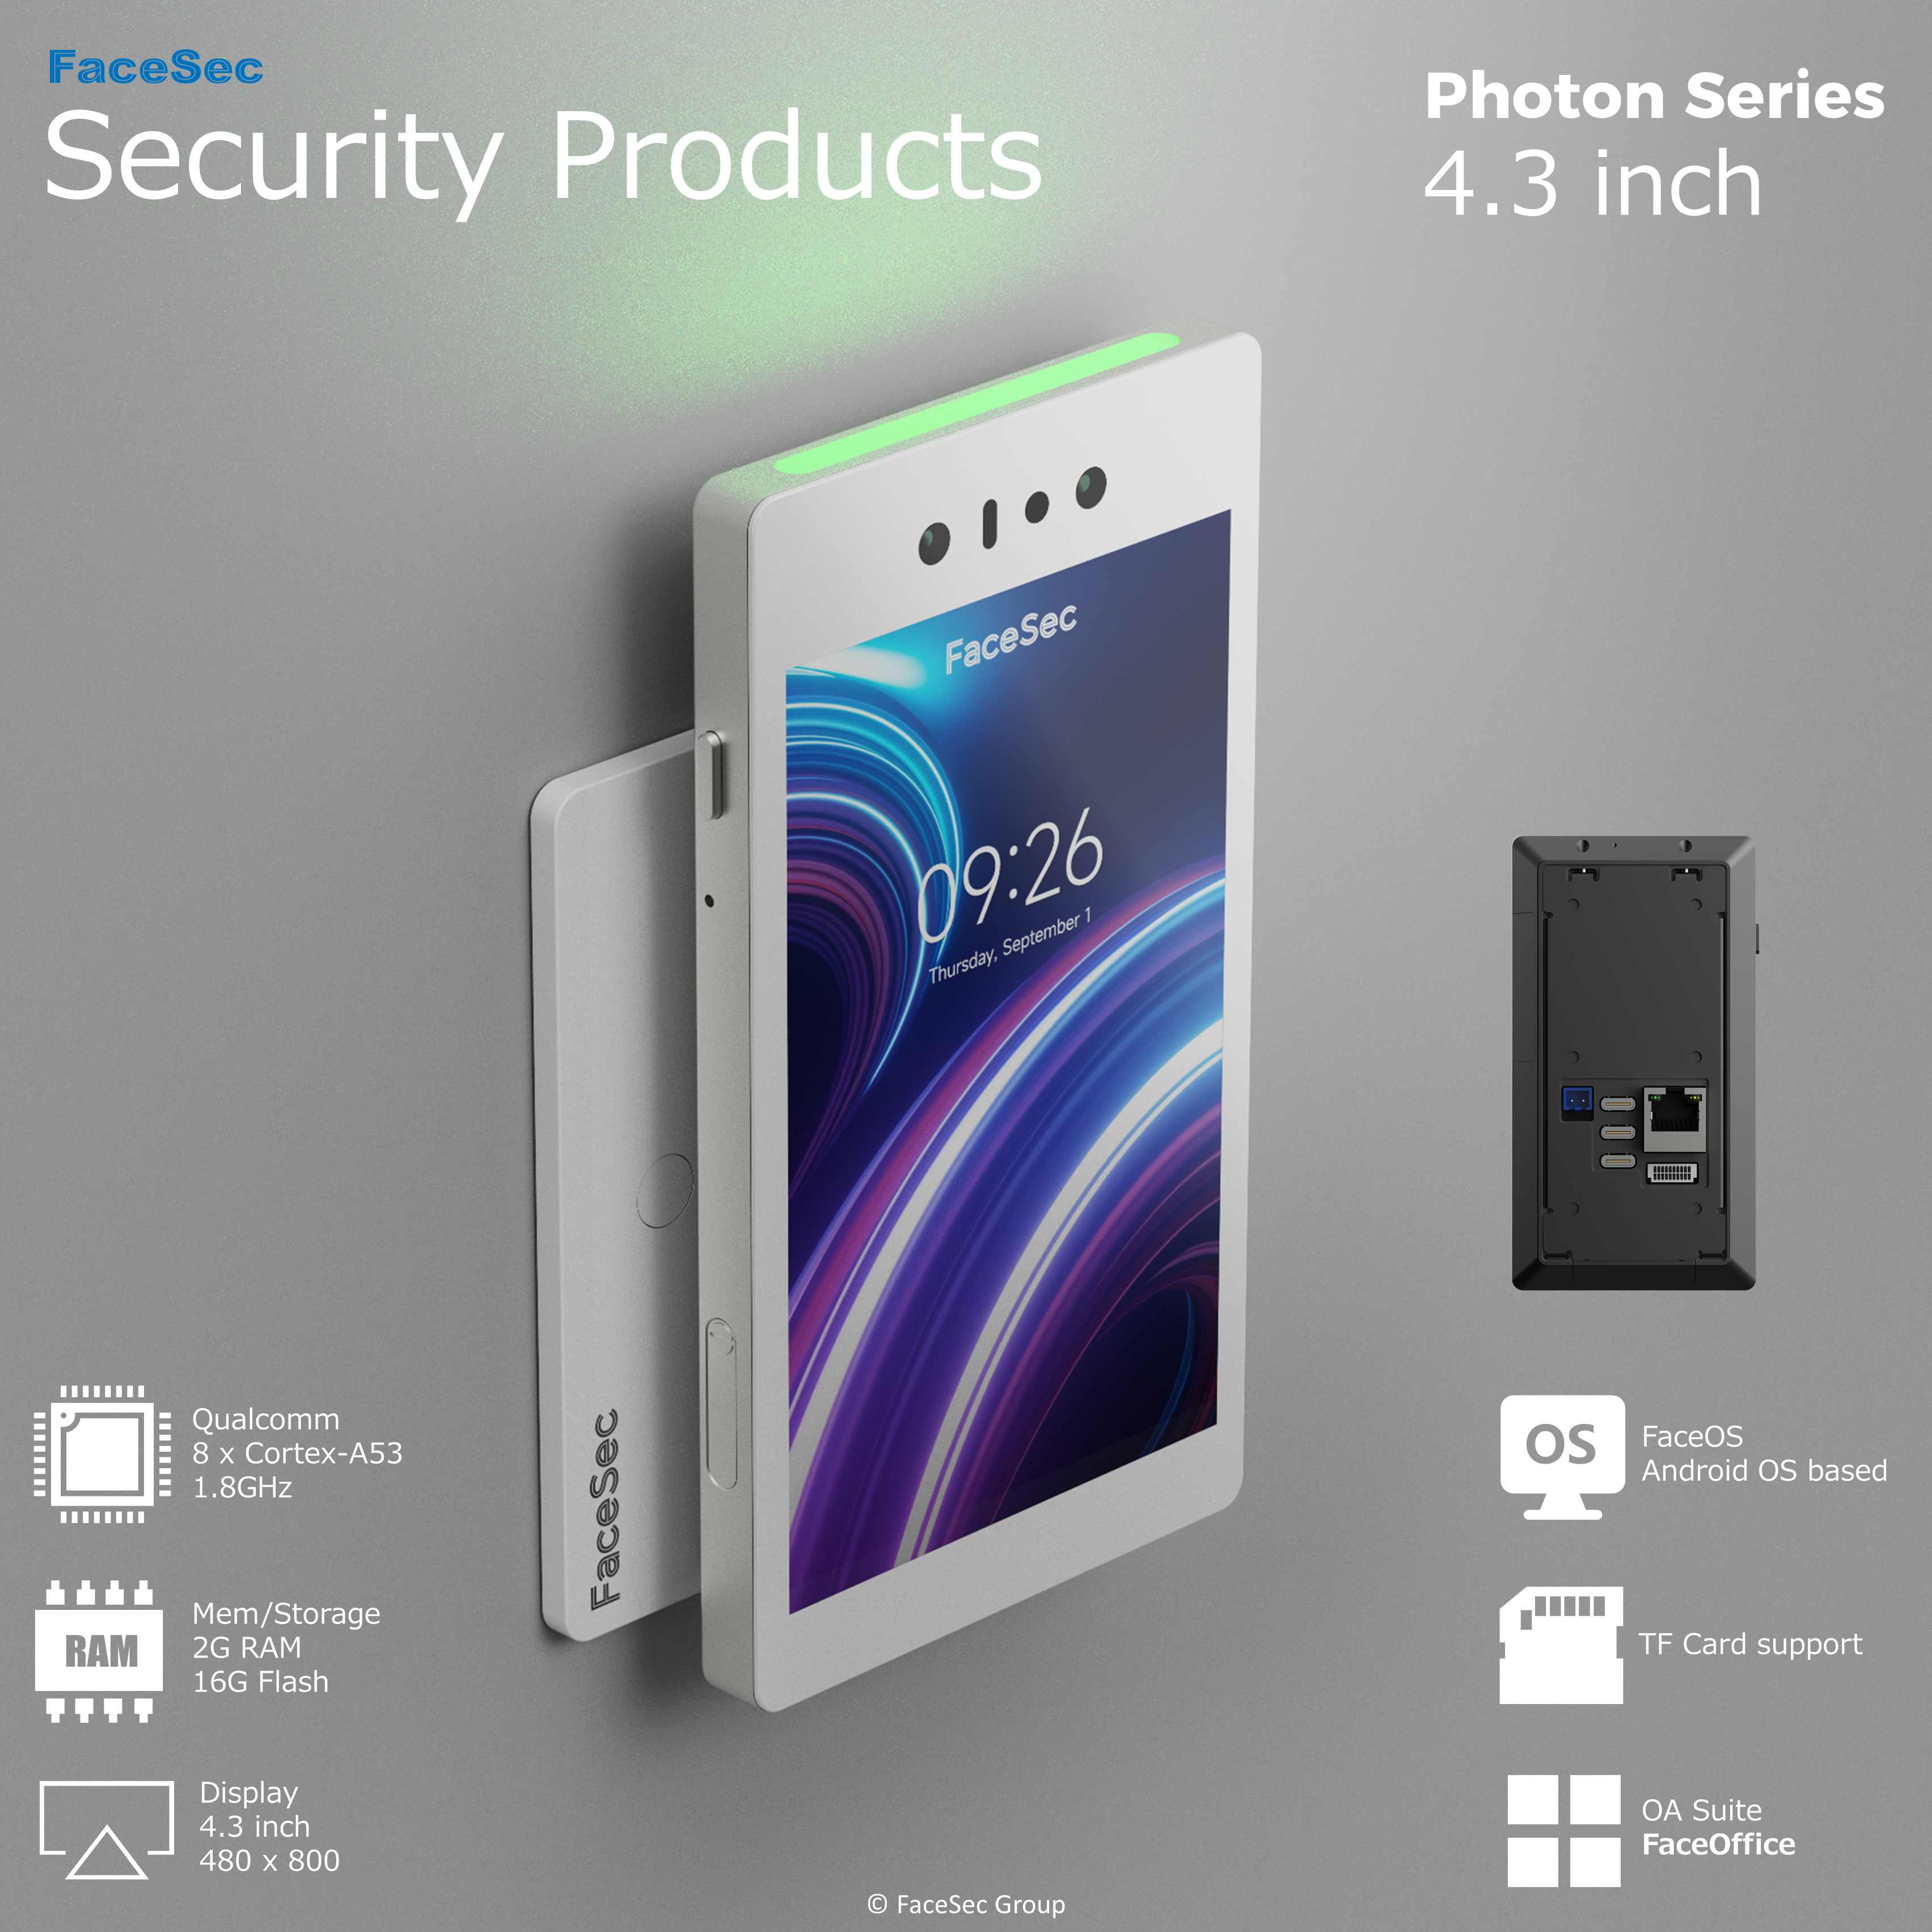 Photon Series 4.3inch(Security Products)